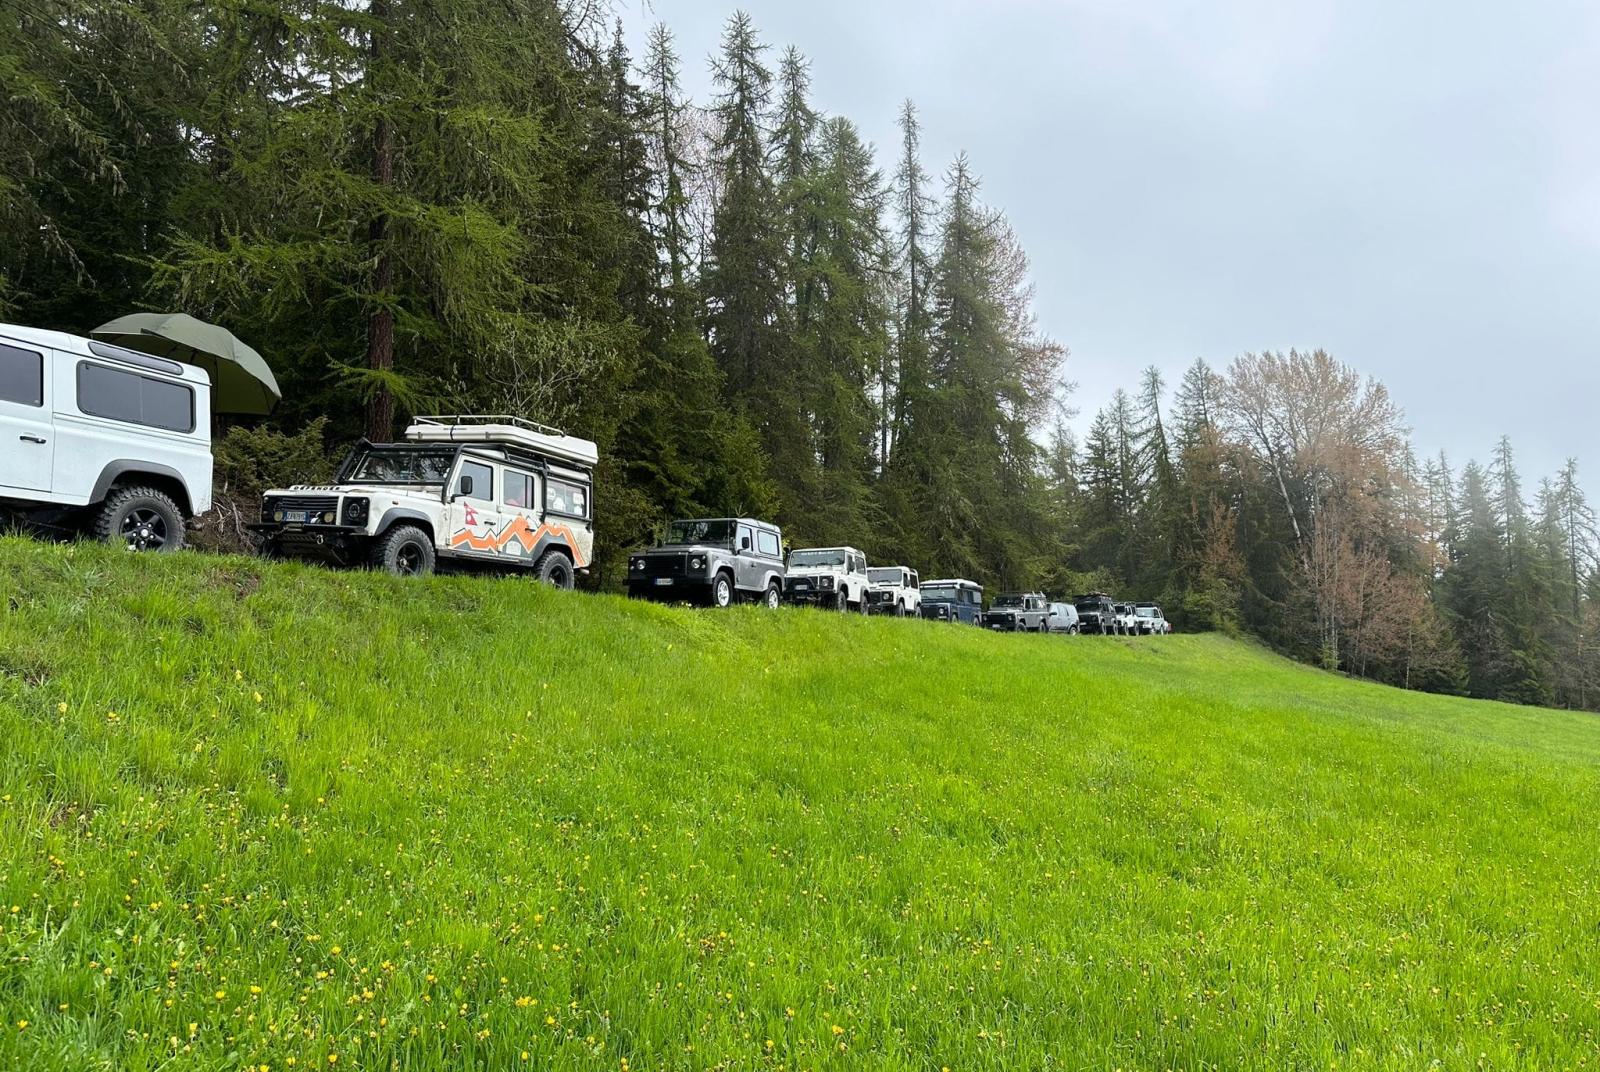 Land Rover meeting at the foot of Monte Rosa